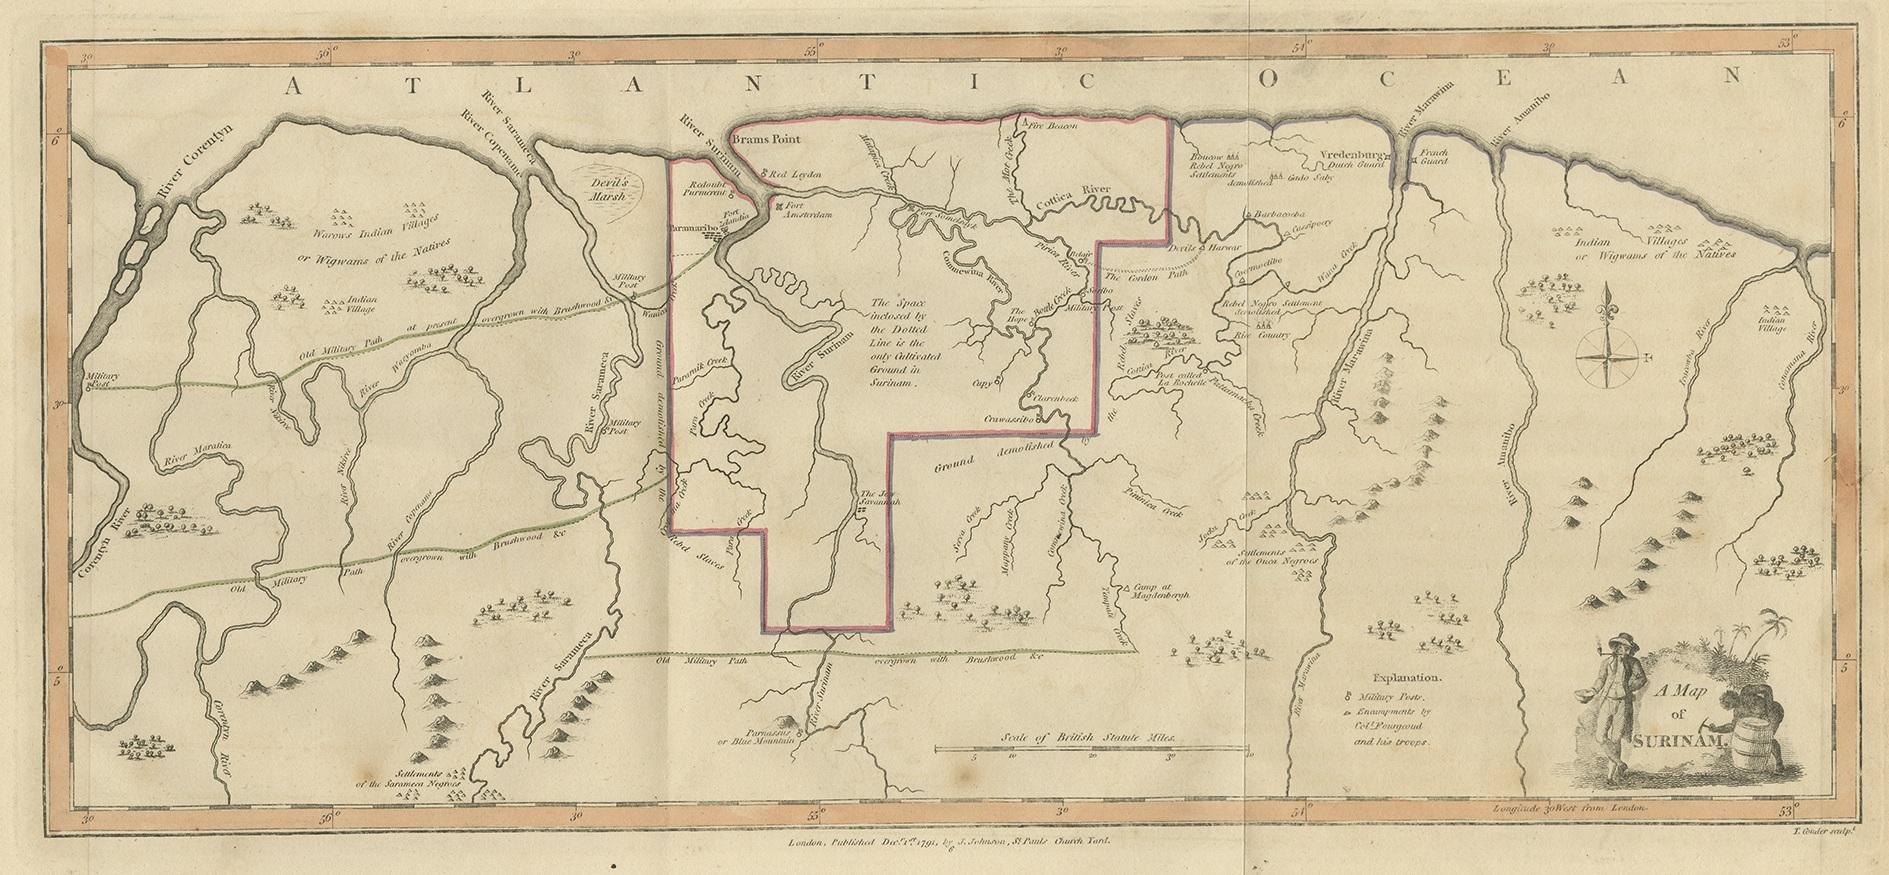 Antique map titled 'A Map of Surinam'. Original antique map of Surinam, showing Dutch settlements, military posts, rebel Maroon camps and native villages. This map originates from 'Narrative of a five years' expedition against the revolted negroes